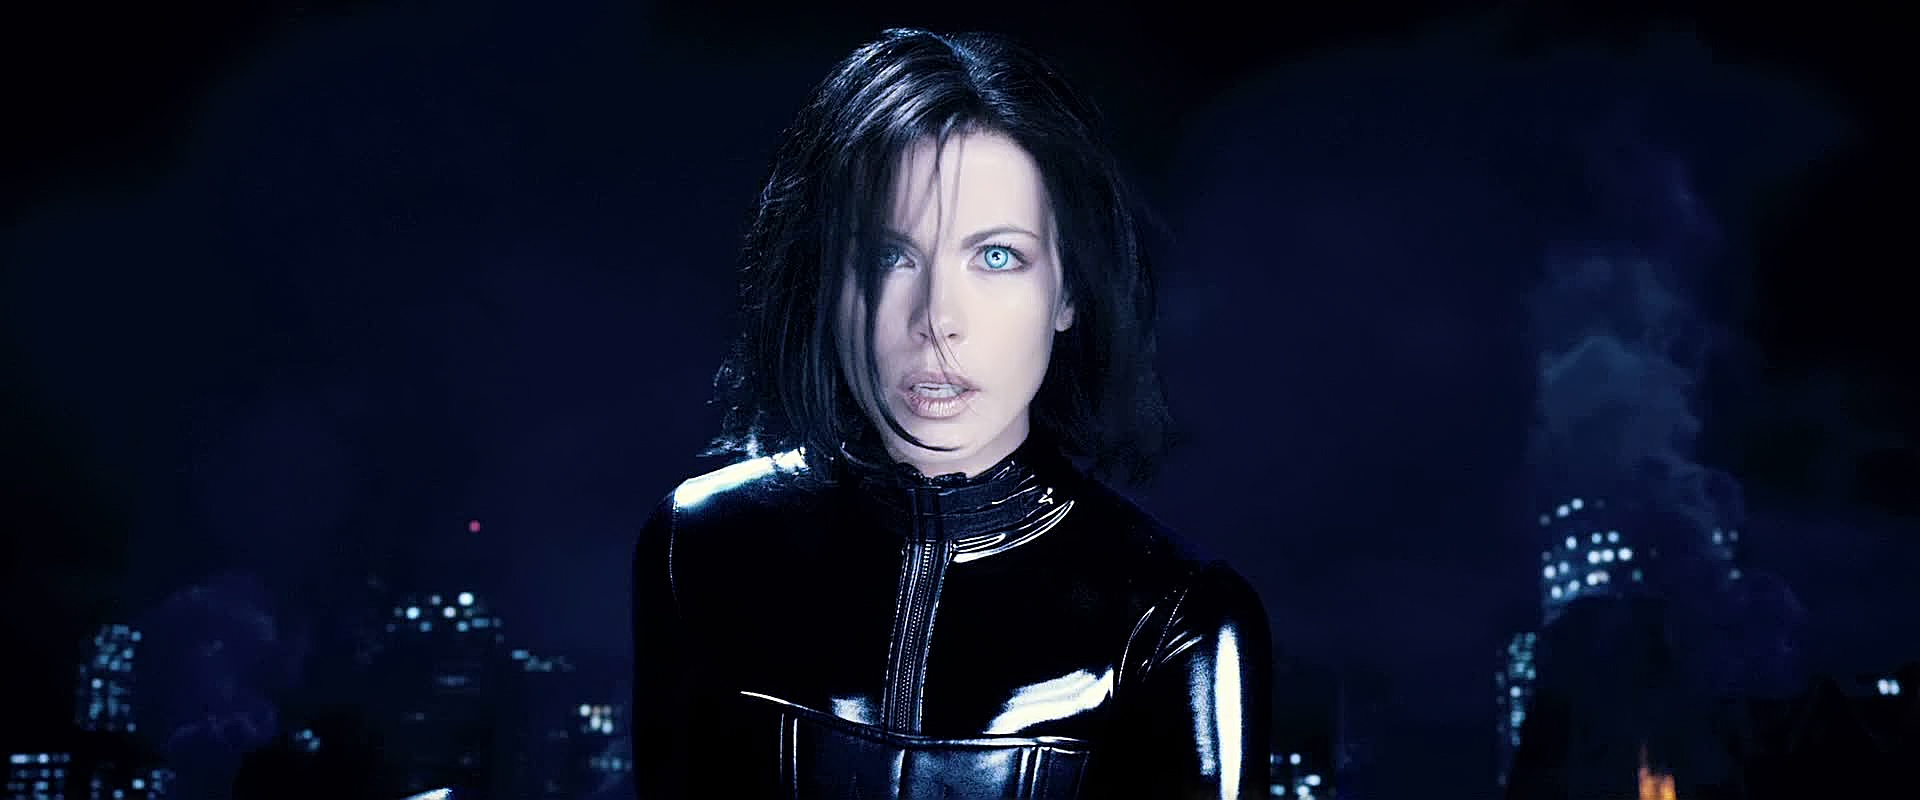 20+ Selene (Underworld) HD Wallpapers and Backgrounds